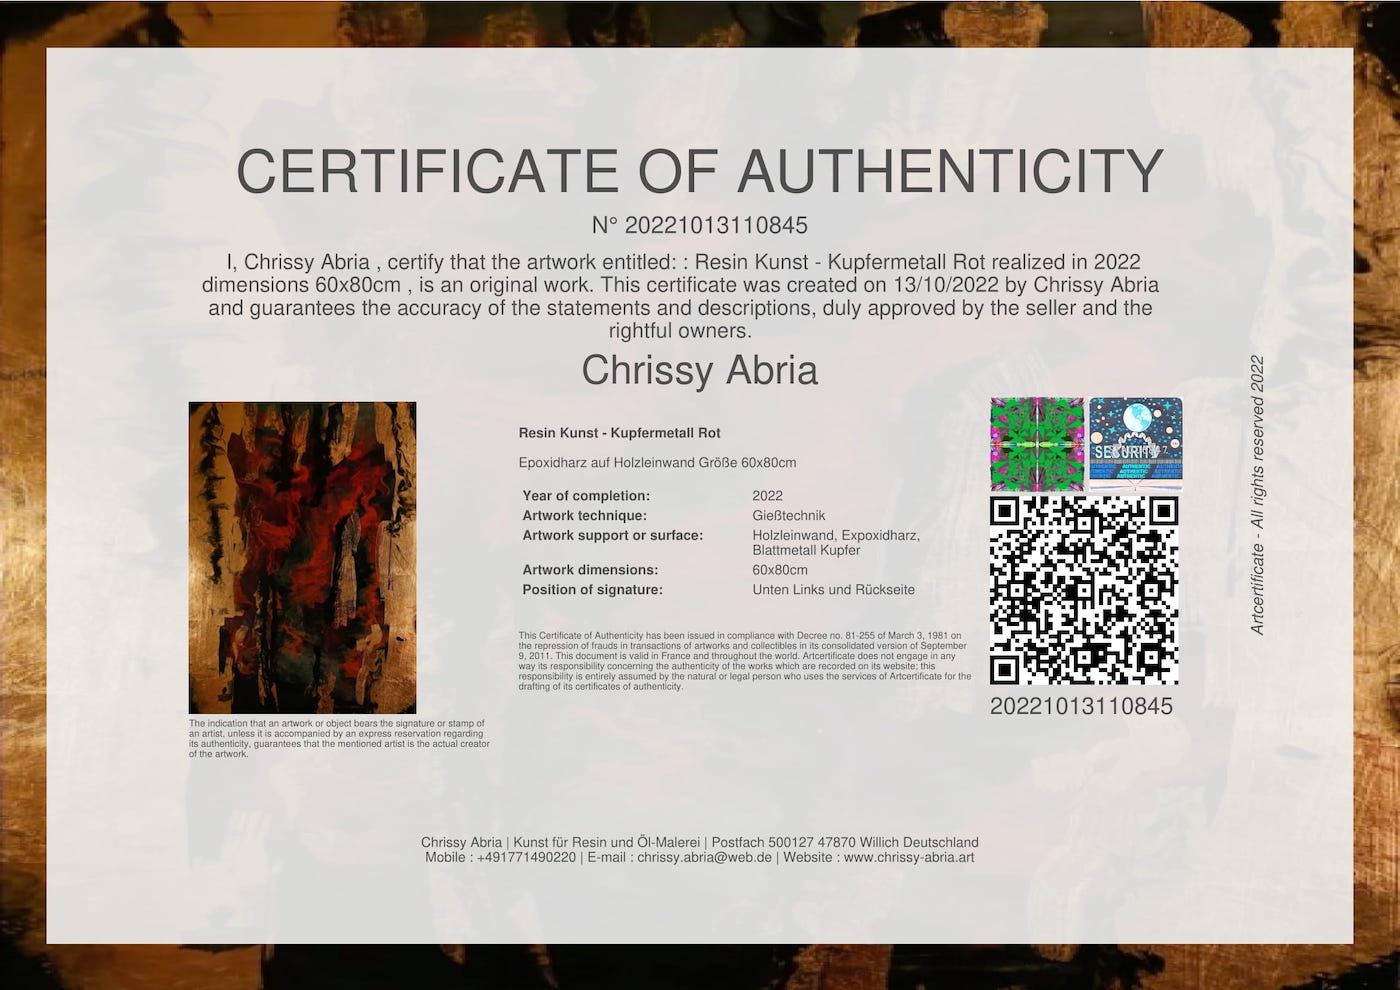 painting-by-chrissy-abria-certificat-20221013110845-1